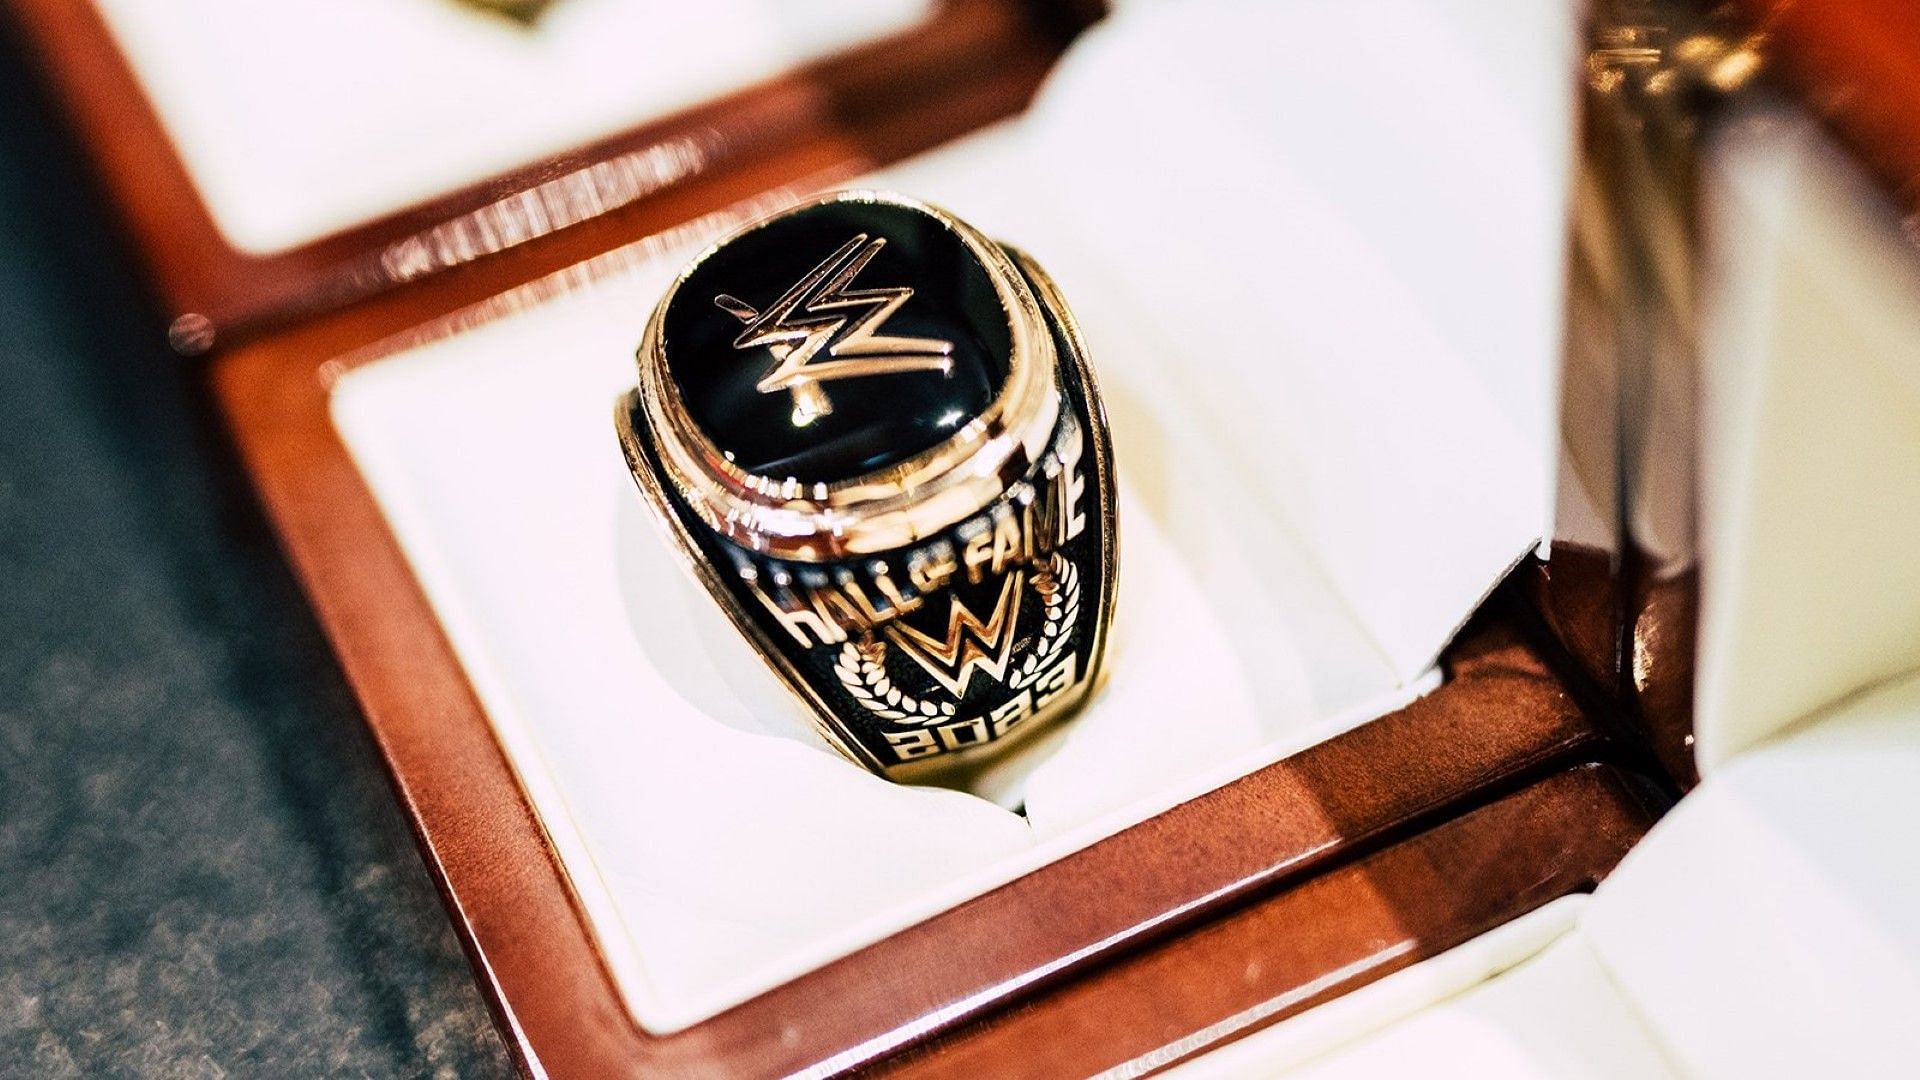 The official ring for the WWE Hall of Fame inductees